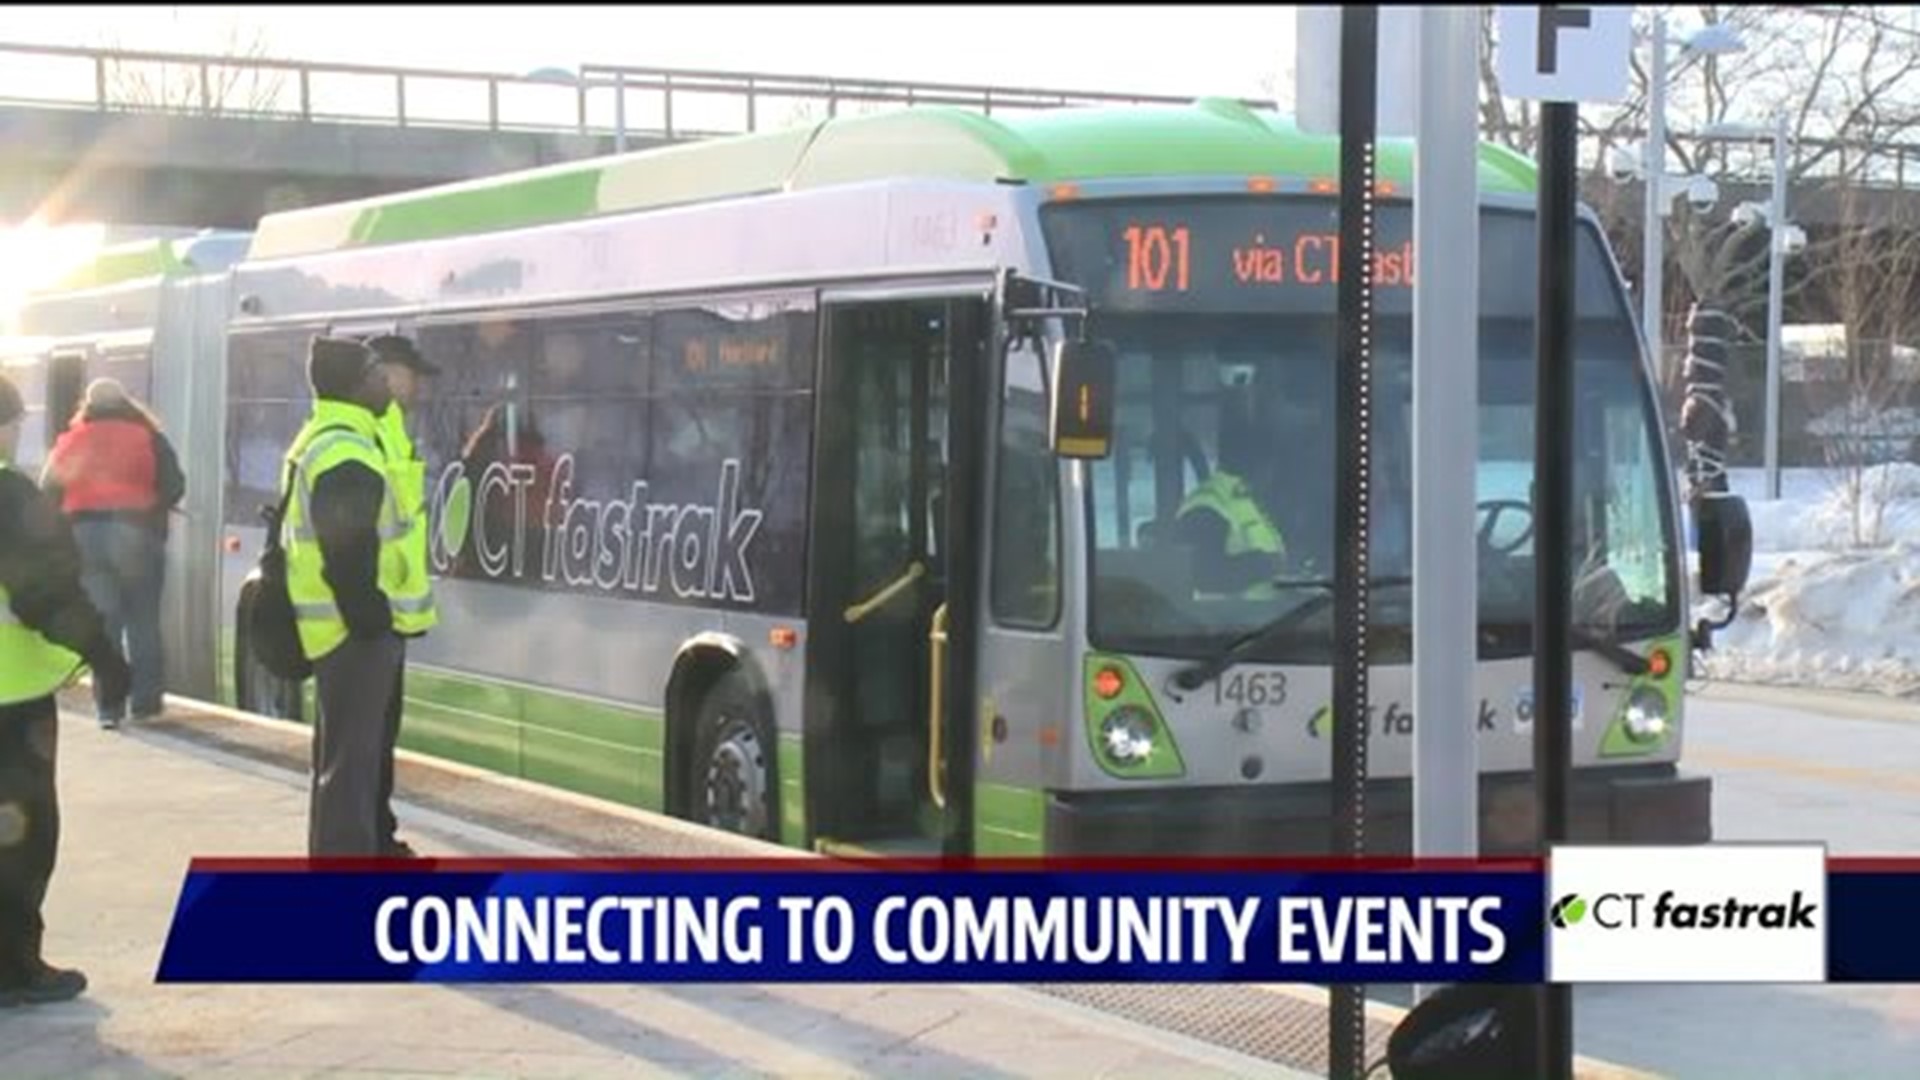 Using CTfastrak to get to community events